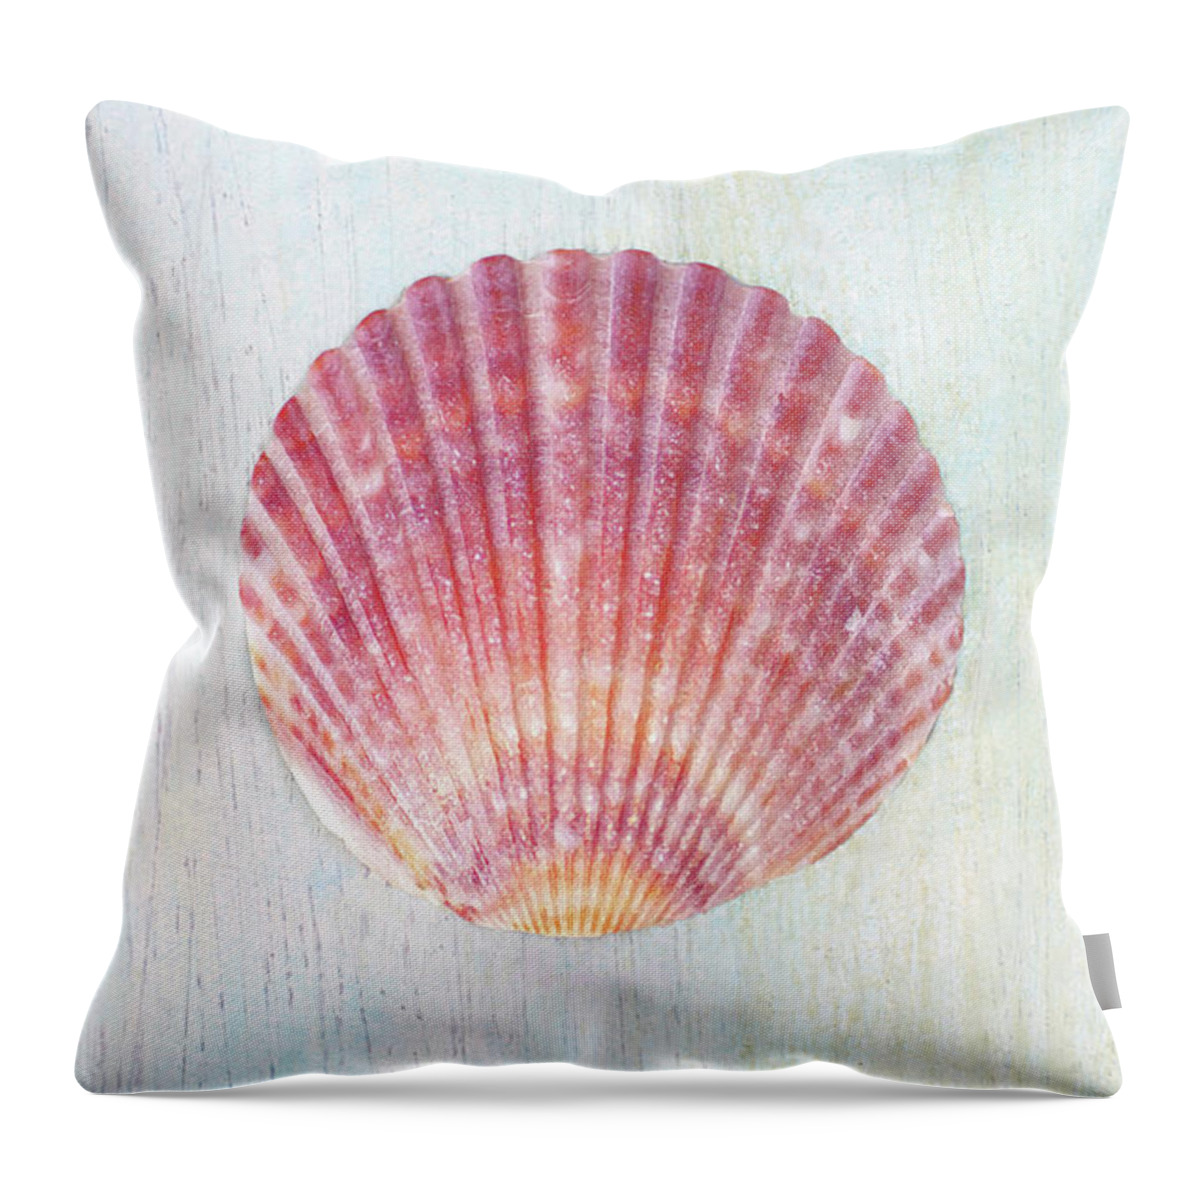 Seashells Throw Pillow featuring the photograph Calico Beauty by Kathi Mirto